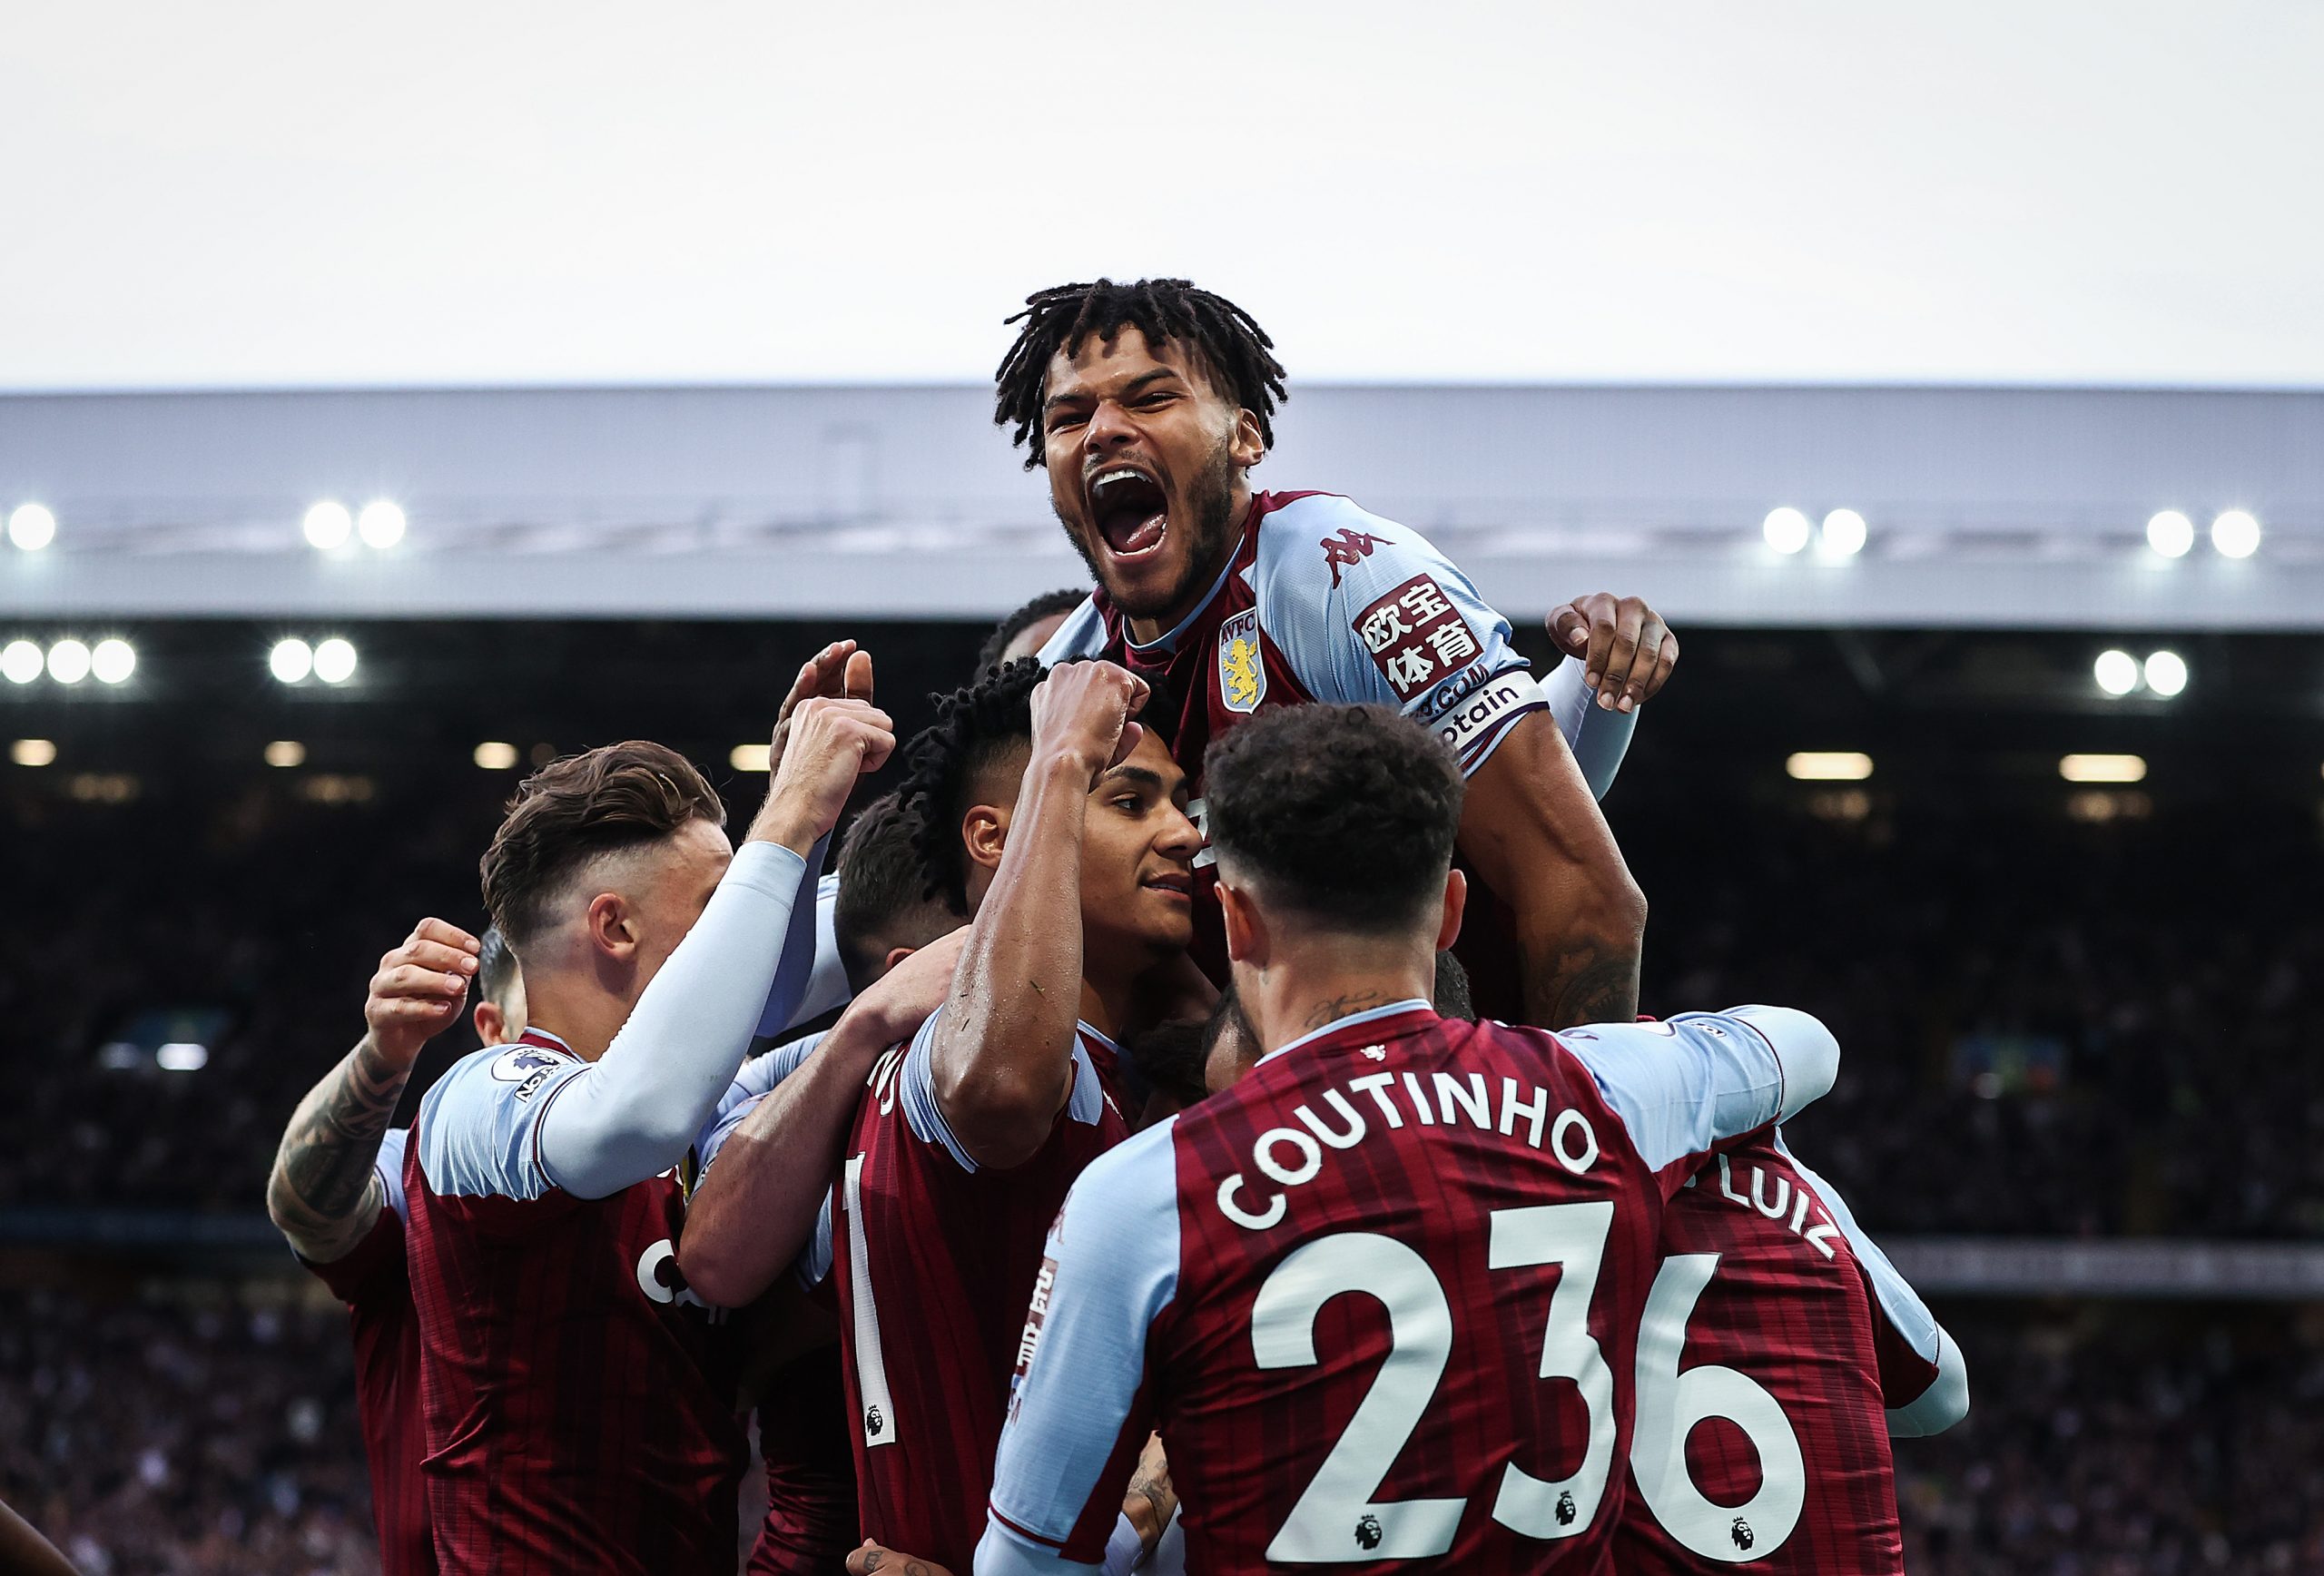 Tyrone Mings of Aston Villa linked to Newcastle United